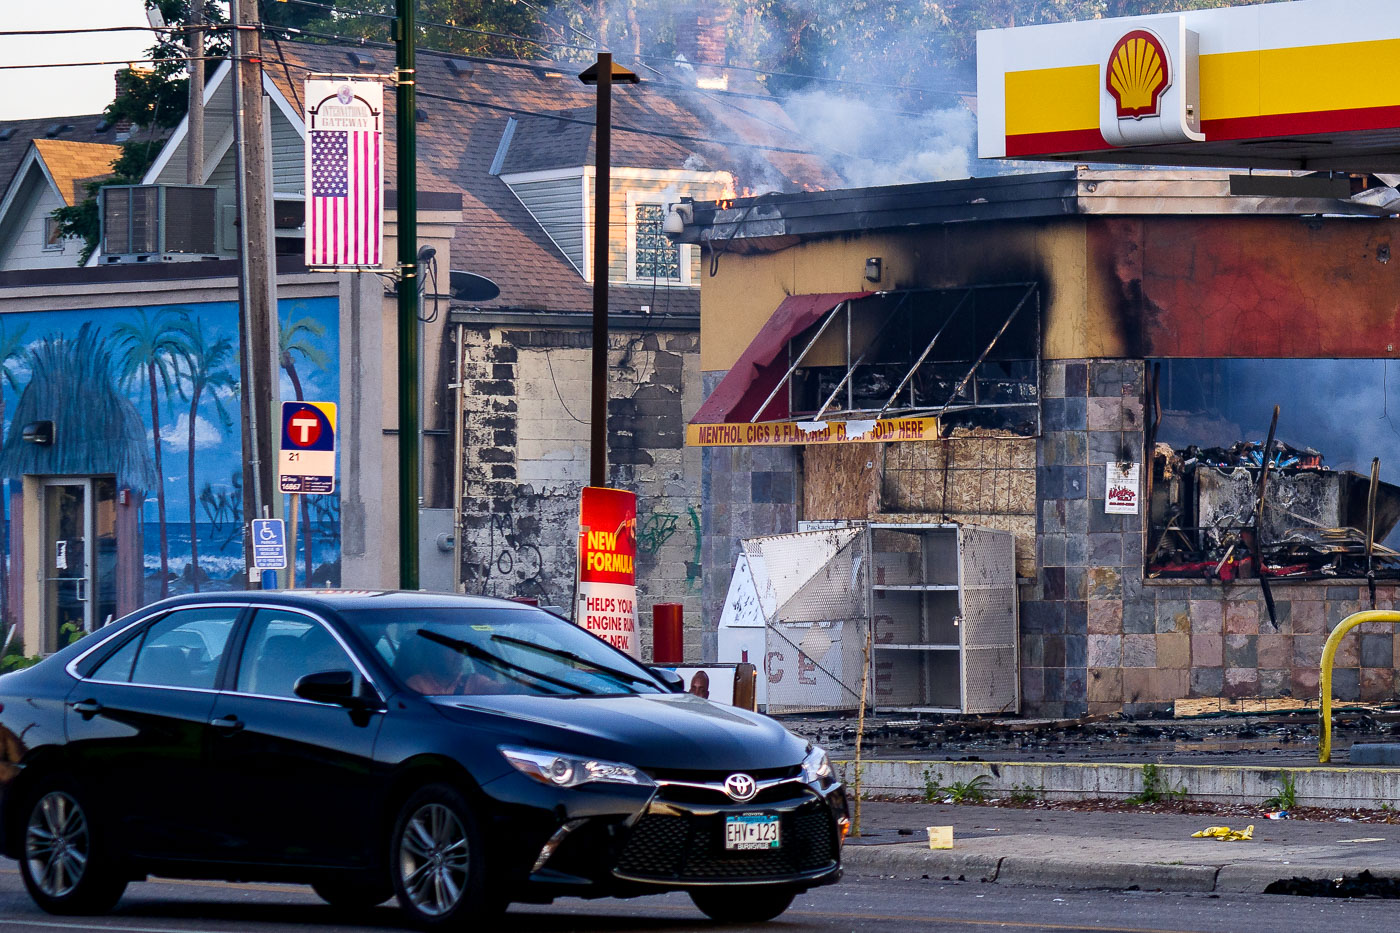 Car drives in front of burning shell gas station